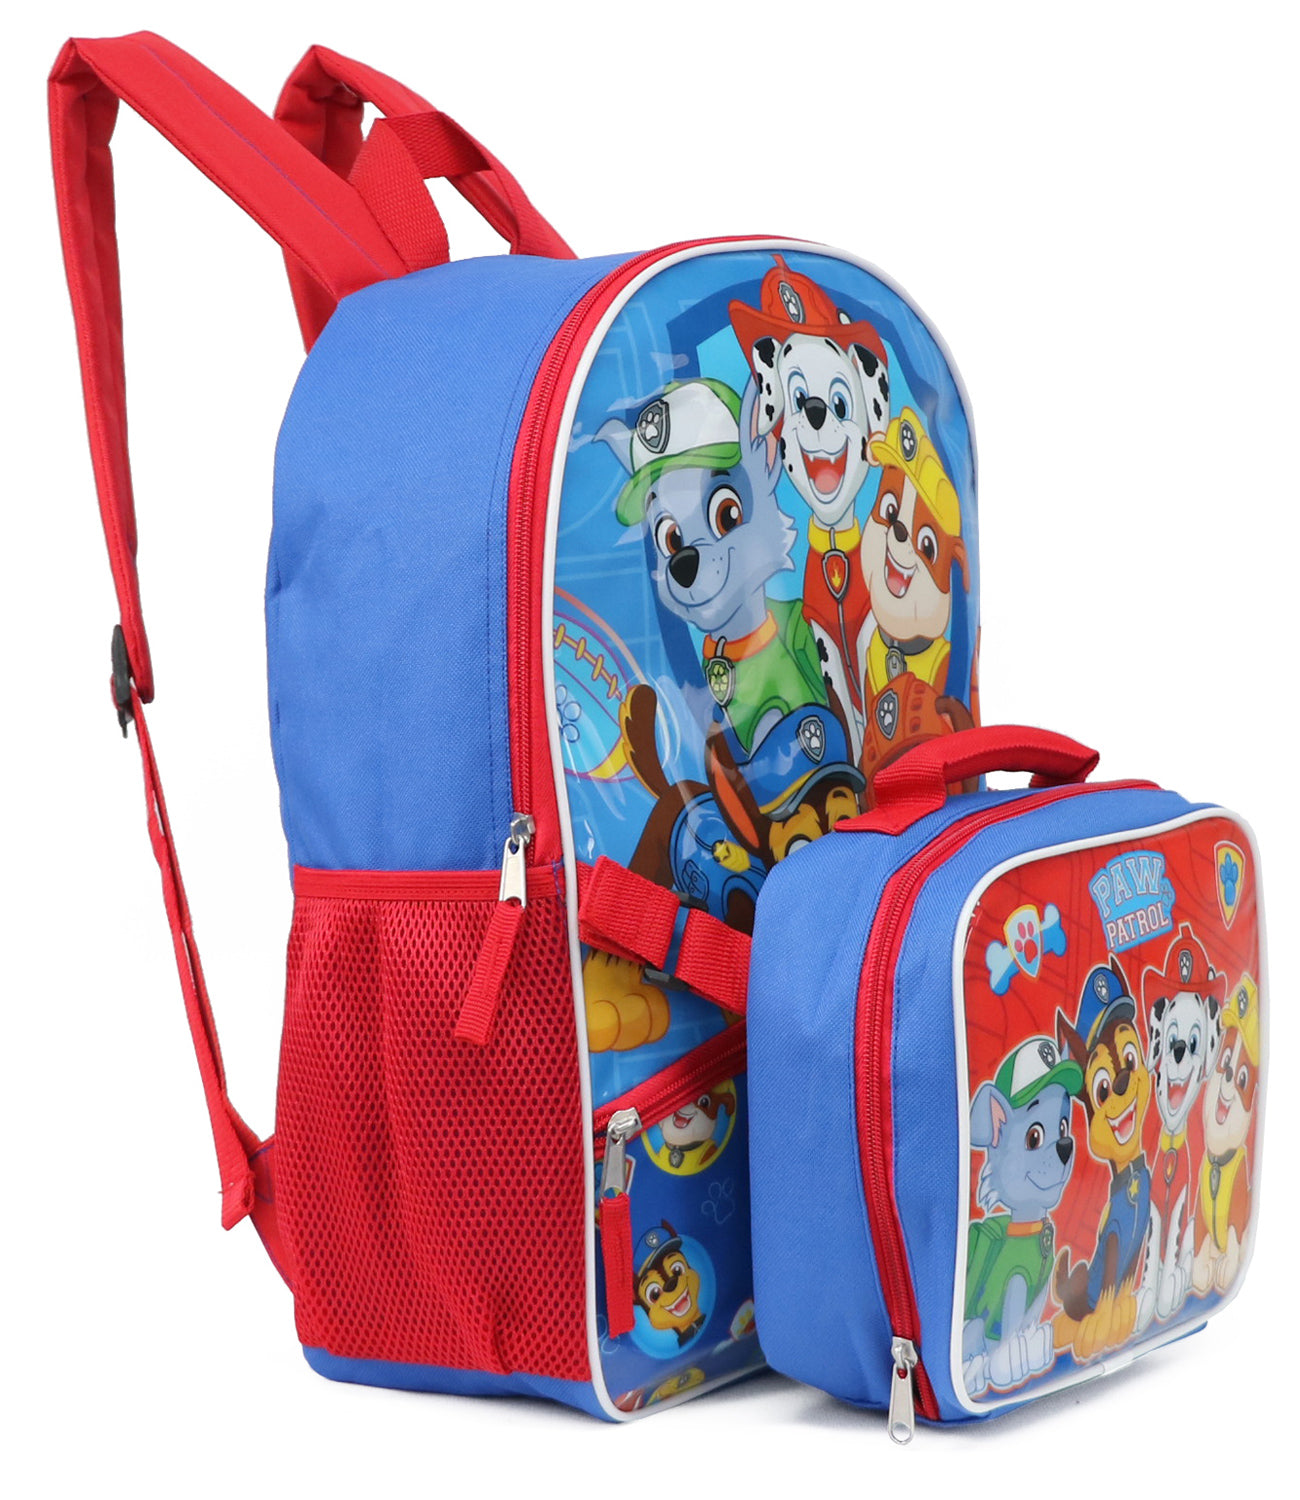 Nickelodeon Paw Patrol Backpack with Lunchbox